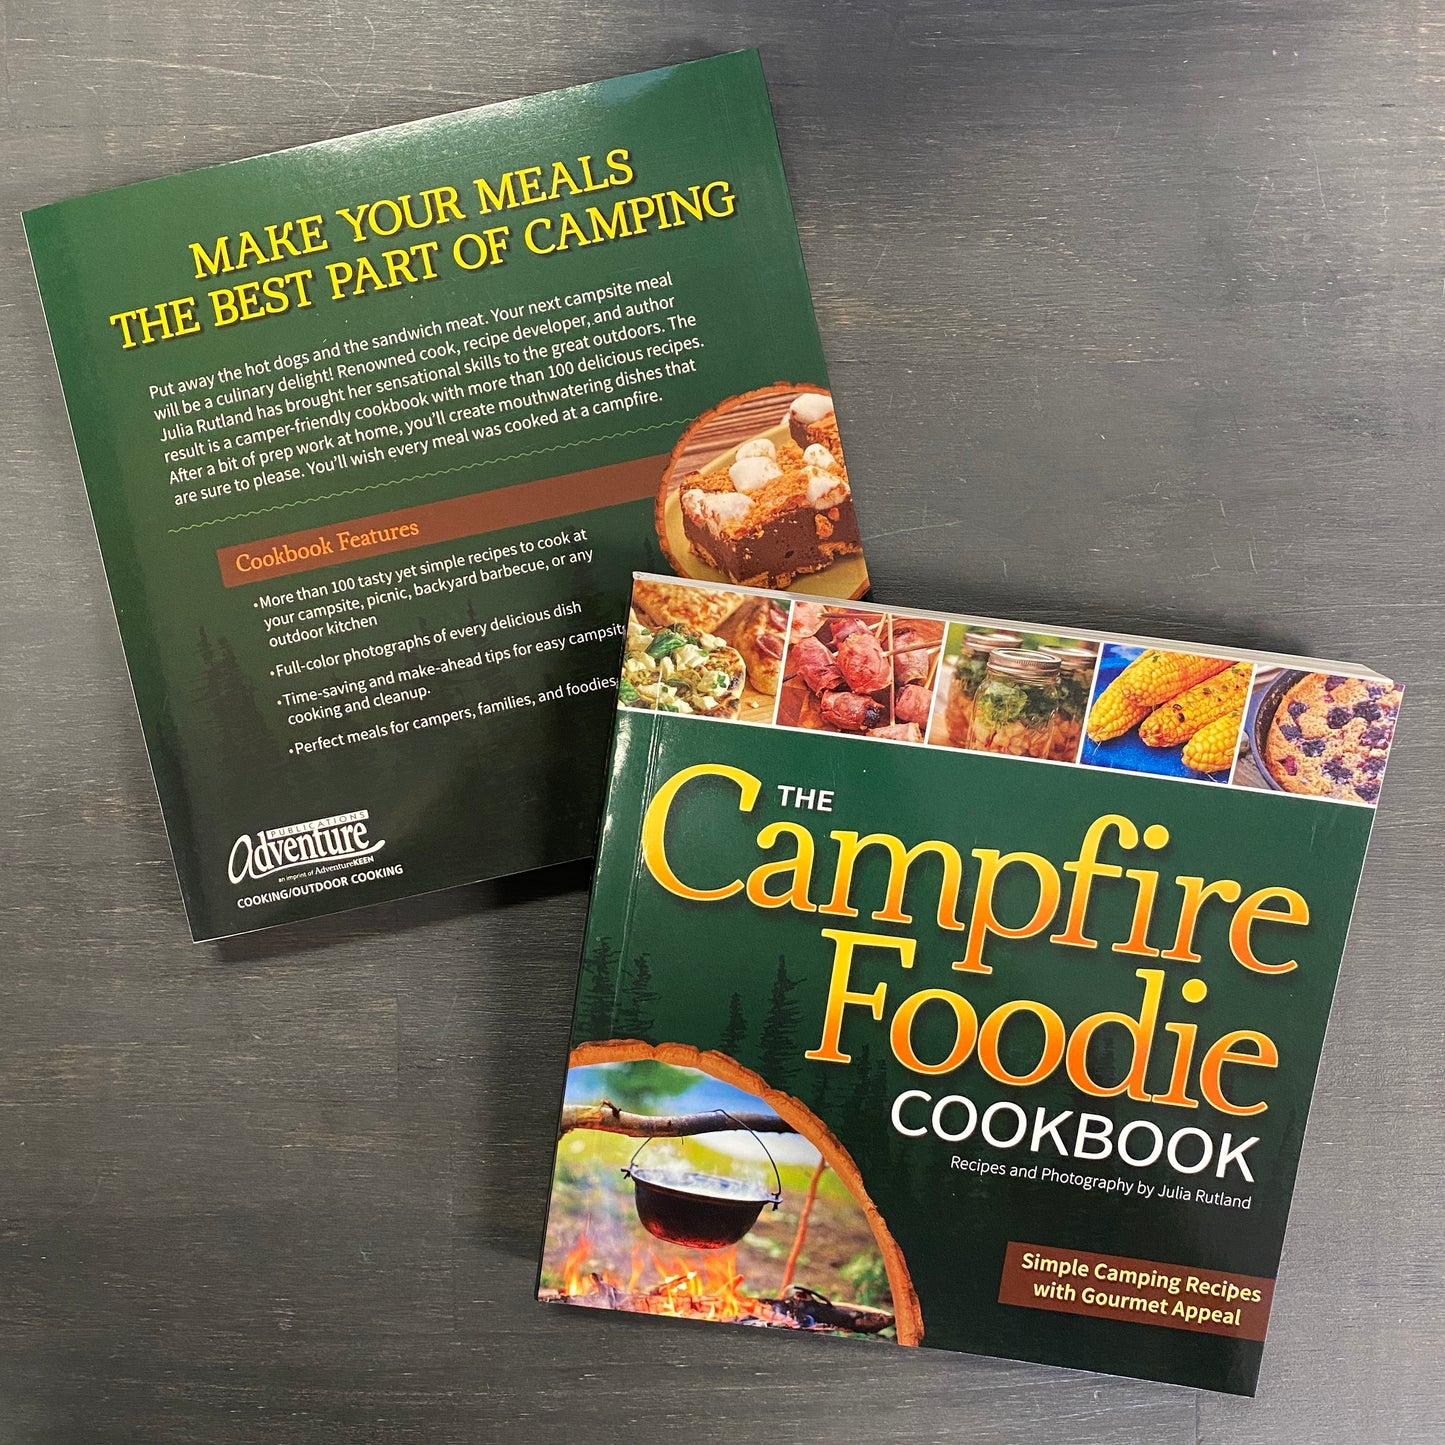 The Campfire Foodie Cookbook